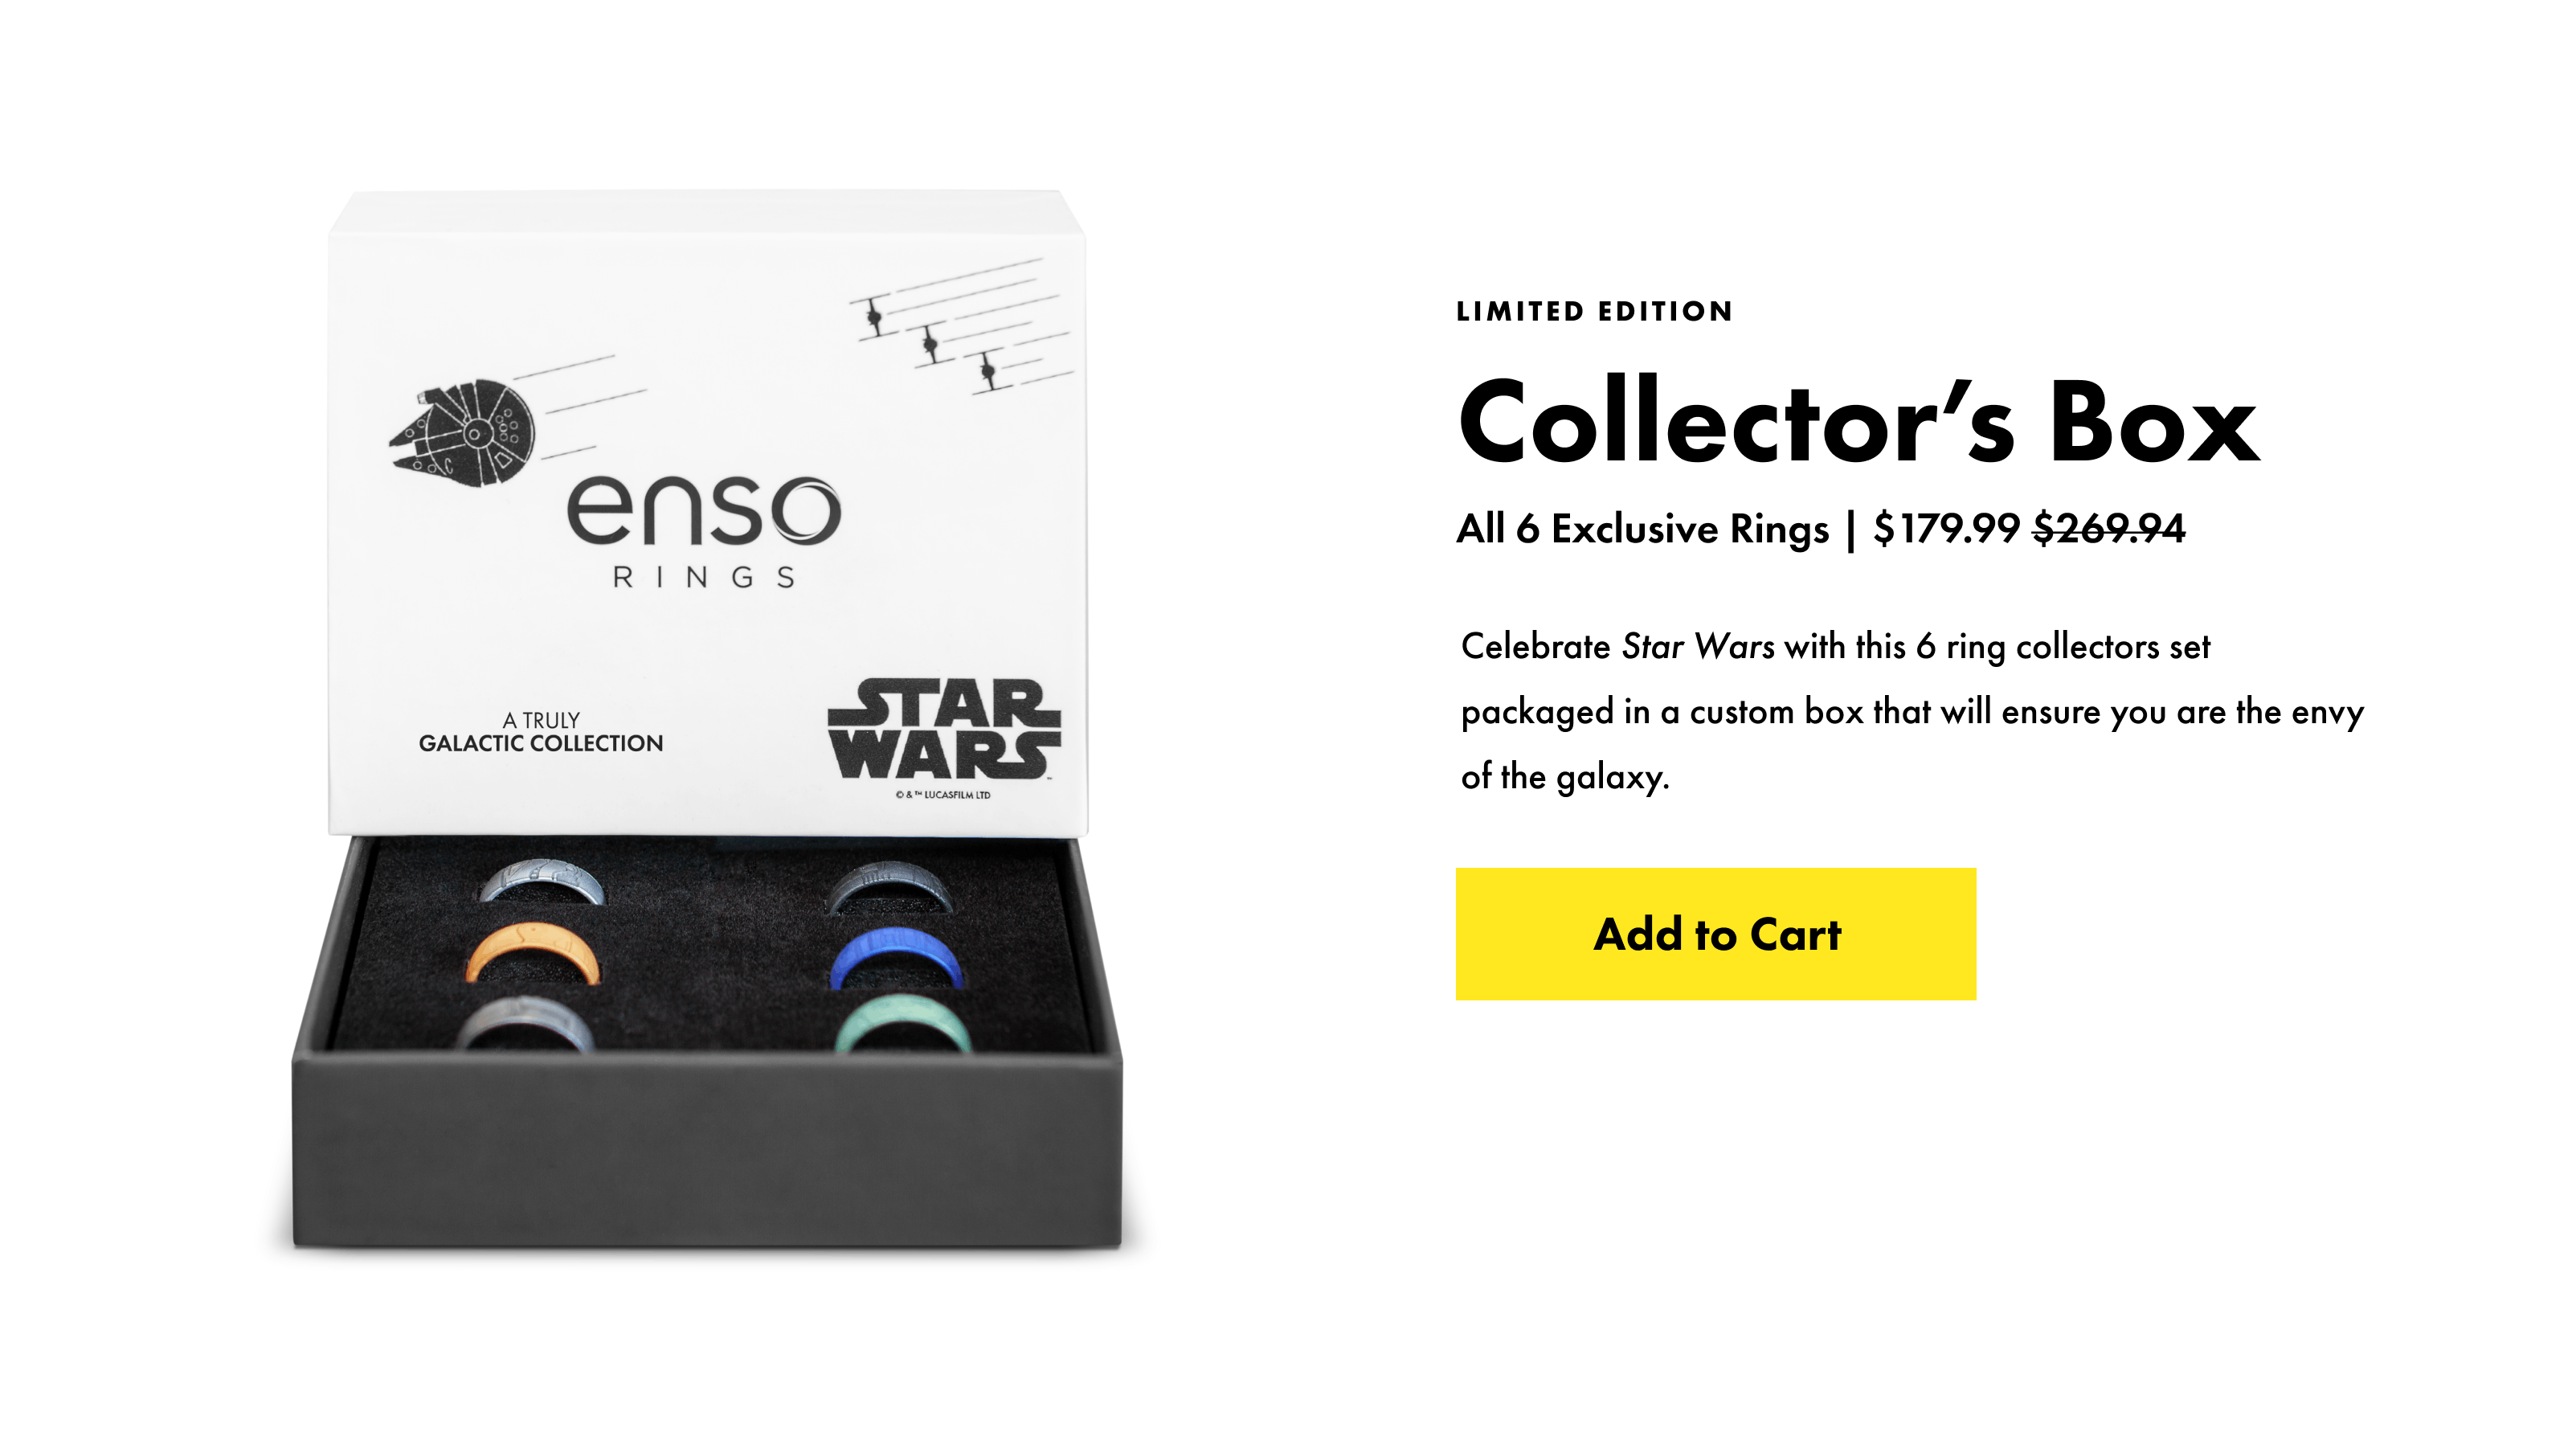 Collector’s Box. All 6 rings. Celebrate Star Wars with this 6 ring collectors set packaged in a custom box that will ensure you are the envy of the galaxy. Click here to shop the Collector’s Box.